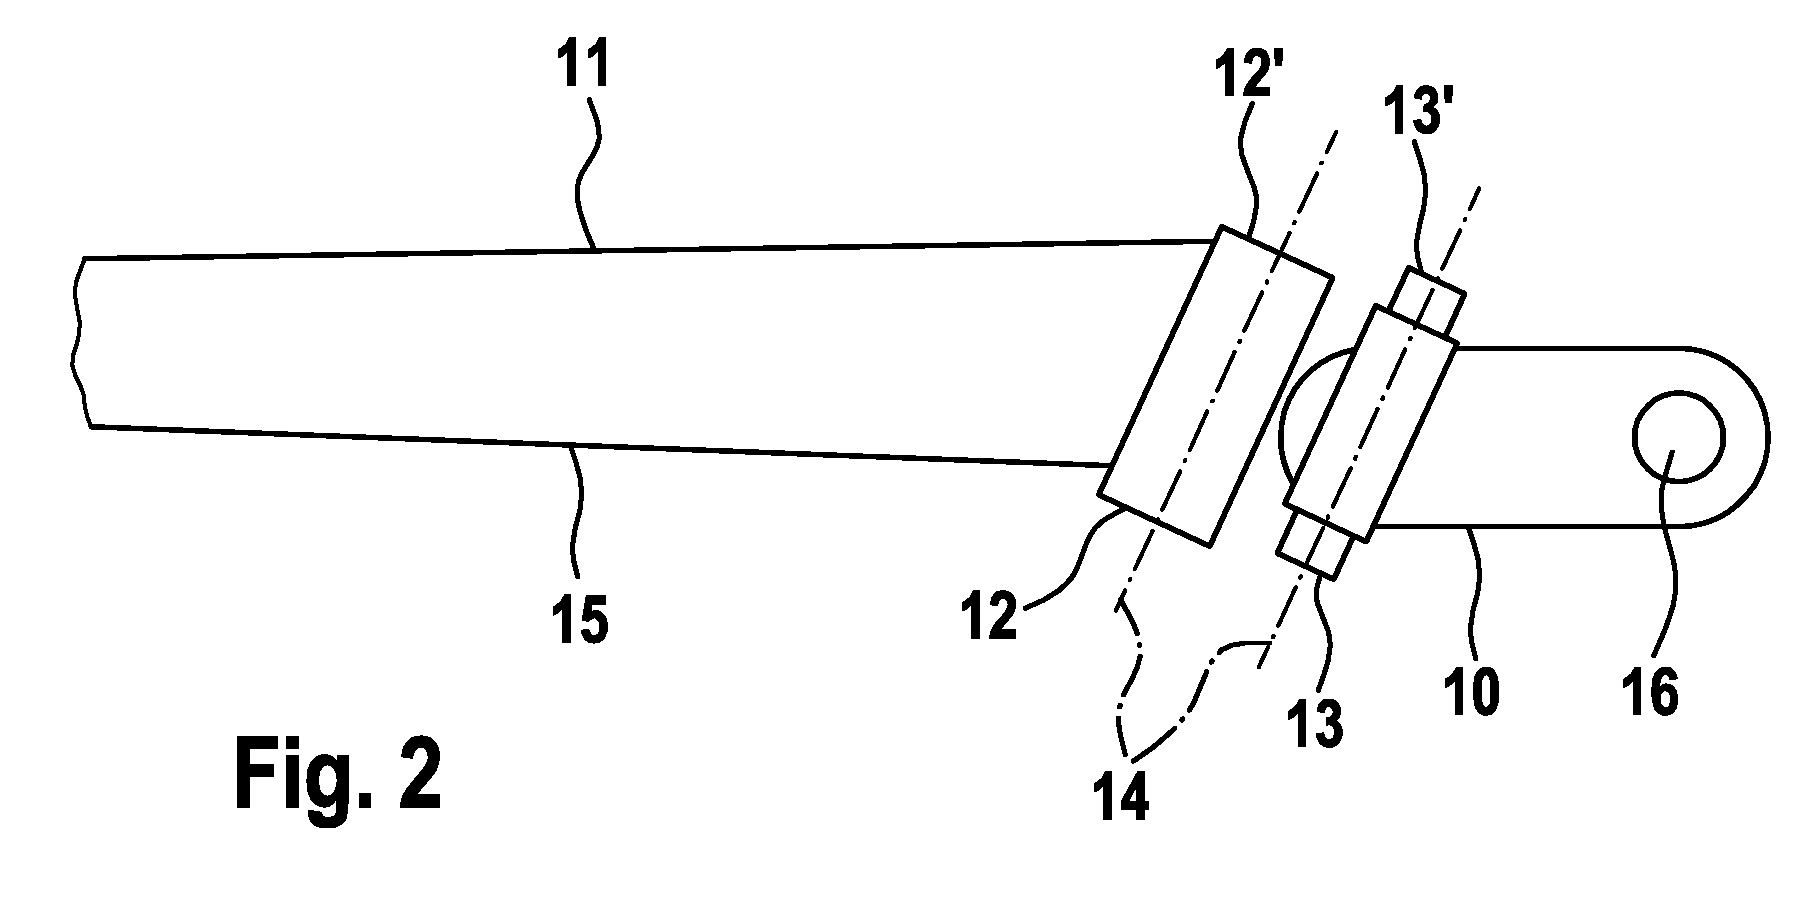 Wiper system for front windscreens of motor vehicles